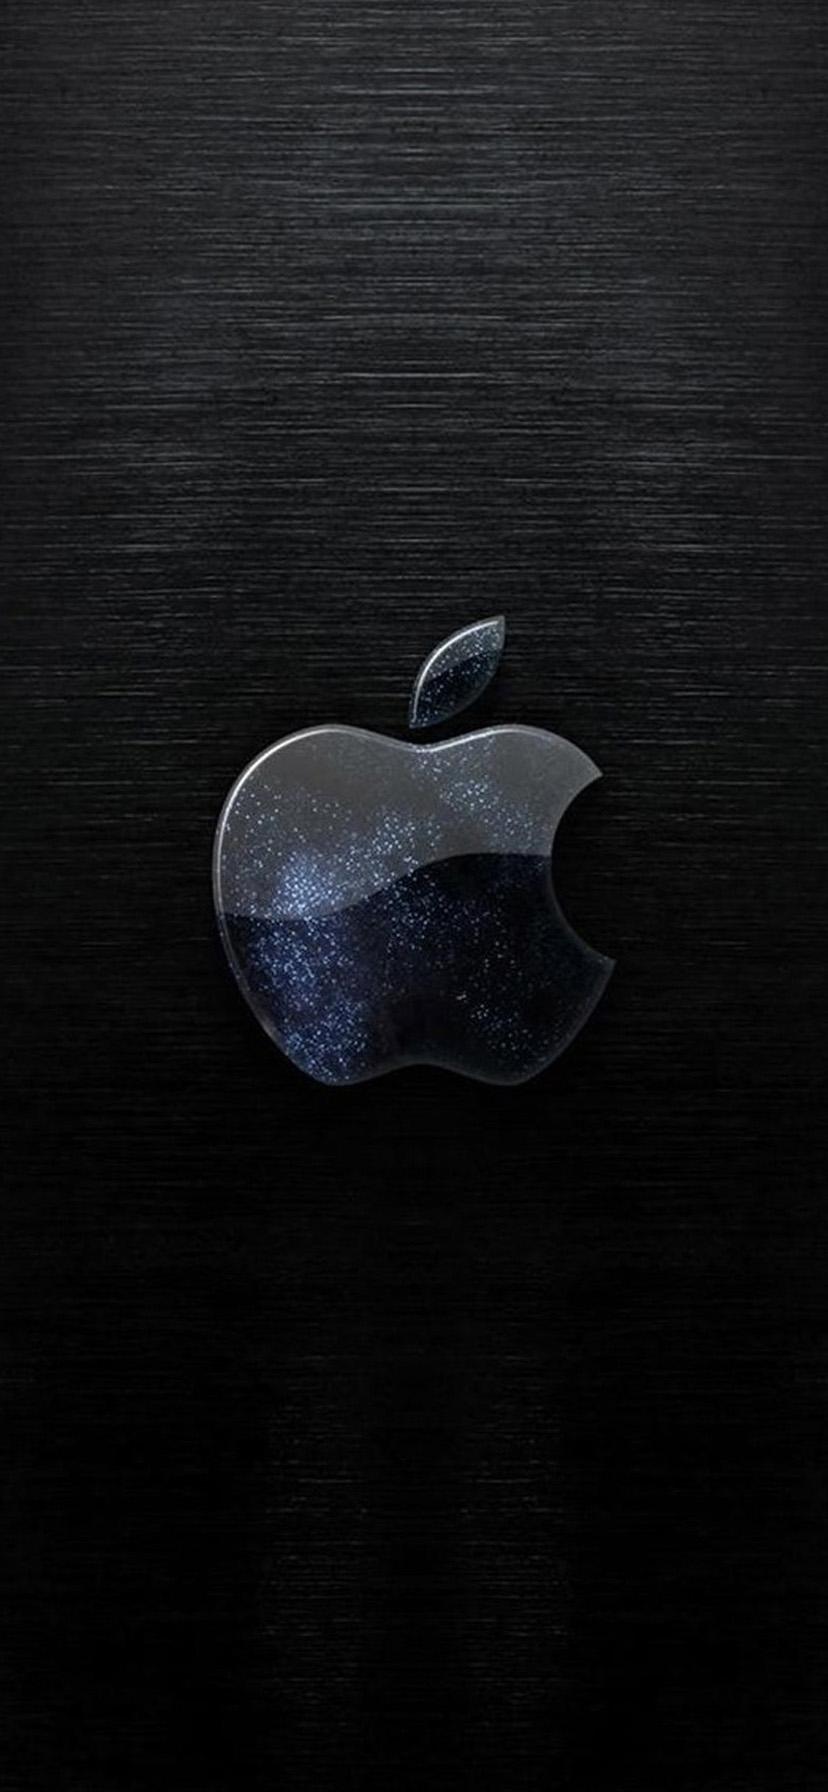 Apple Iphone Xr Wallpapers Wallpaper Cave